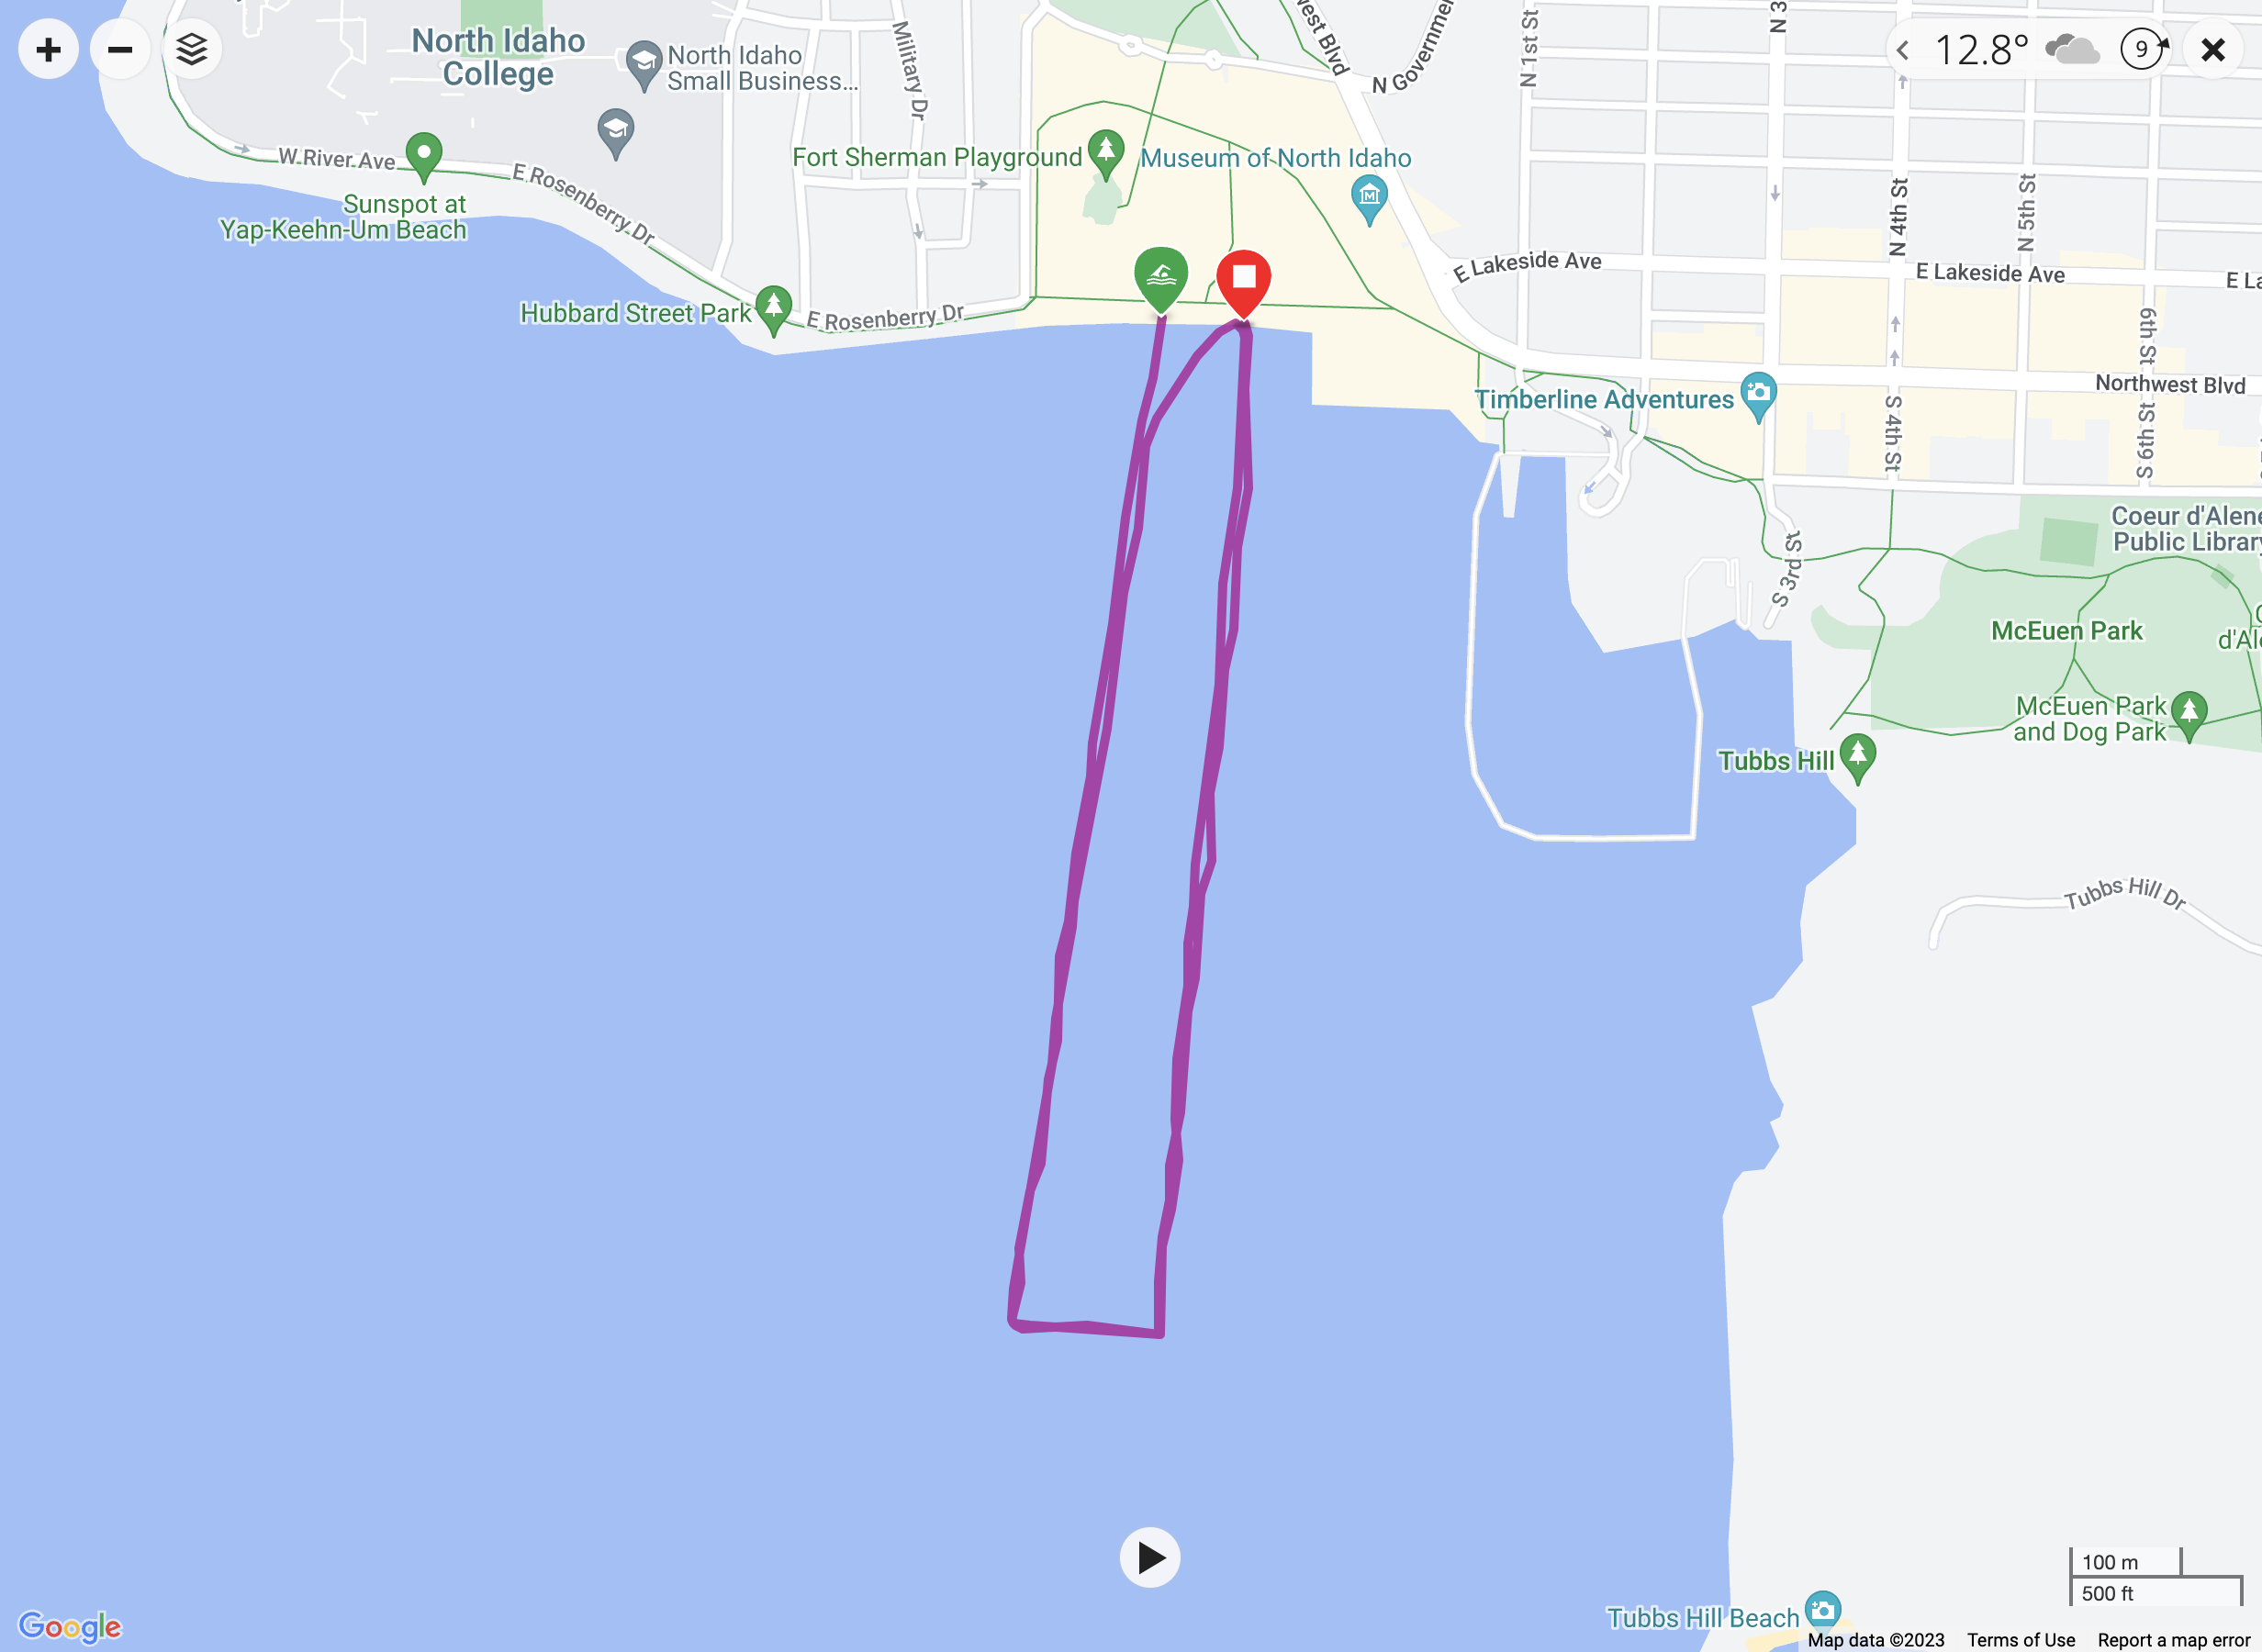 A screenshot from a Garmin Connect map showing the swim course for Ironman Coeur d'Alene.